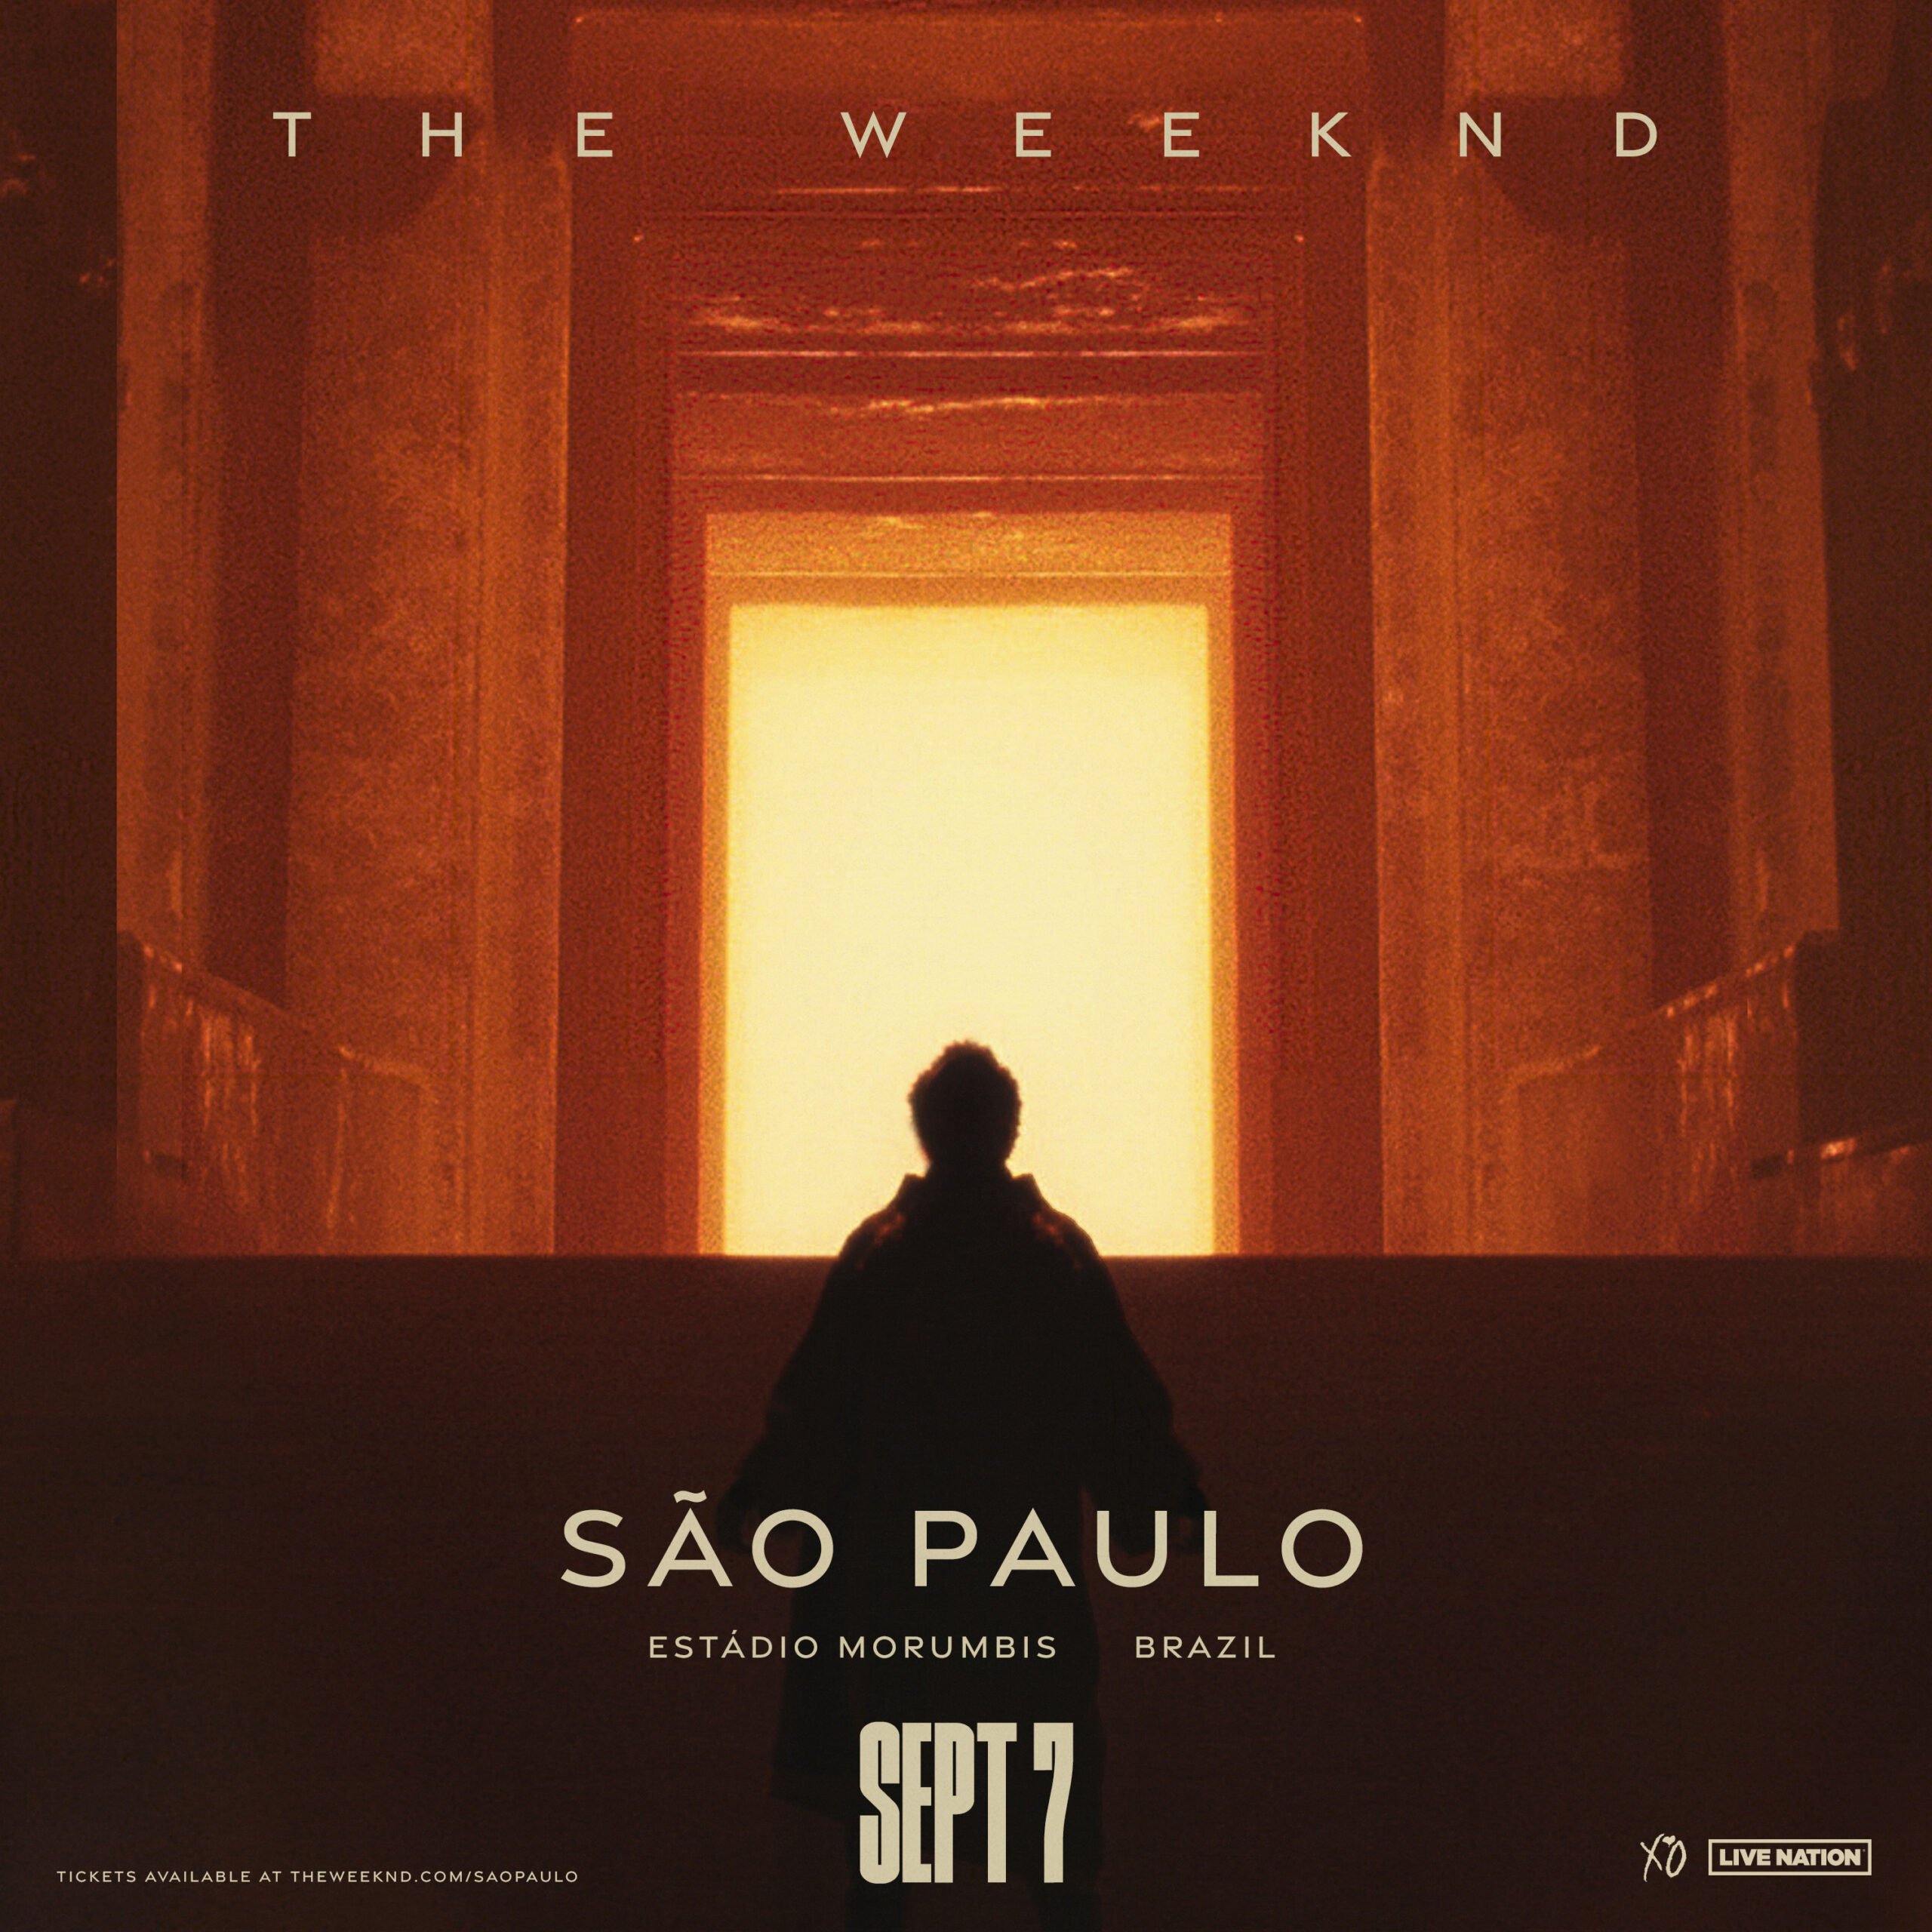 The Weeknd Shares Video Teaser For One-Off São Paulo Concert